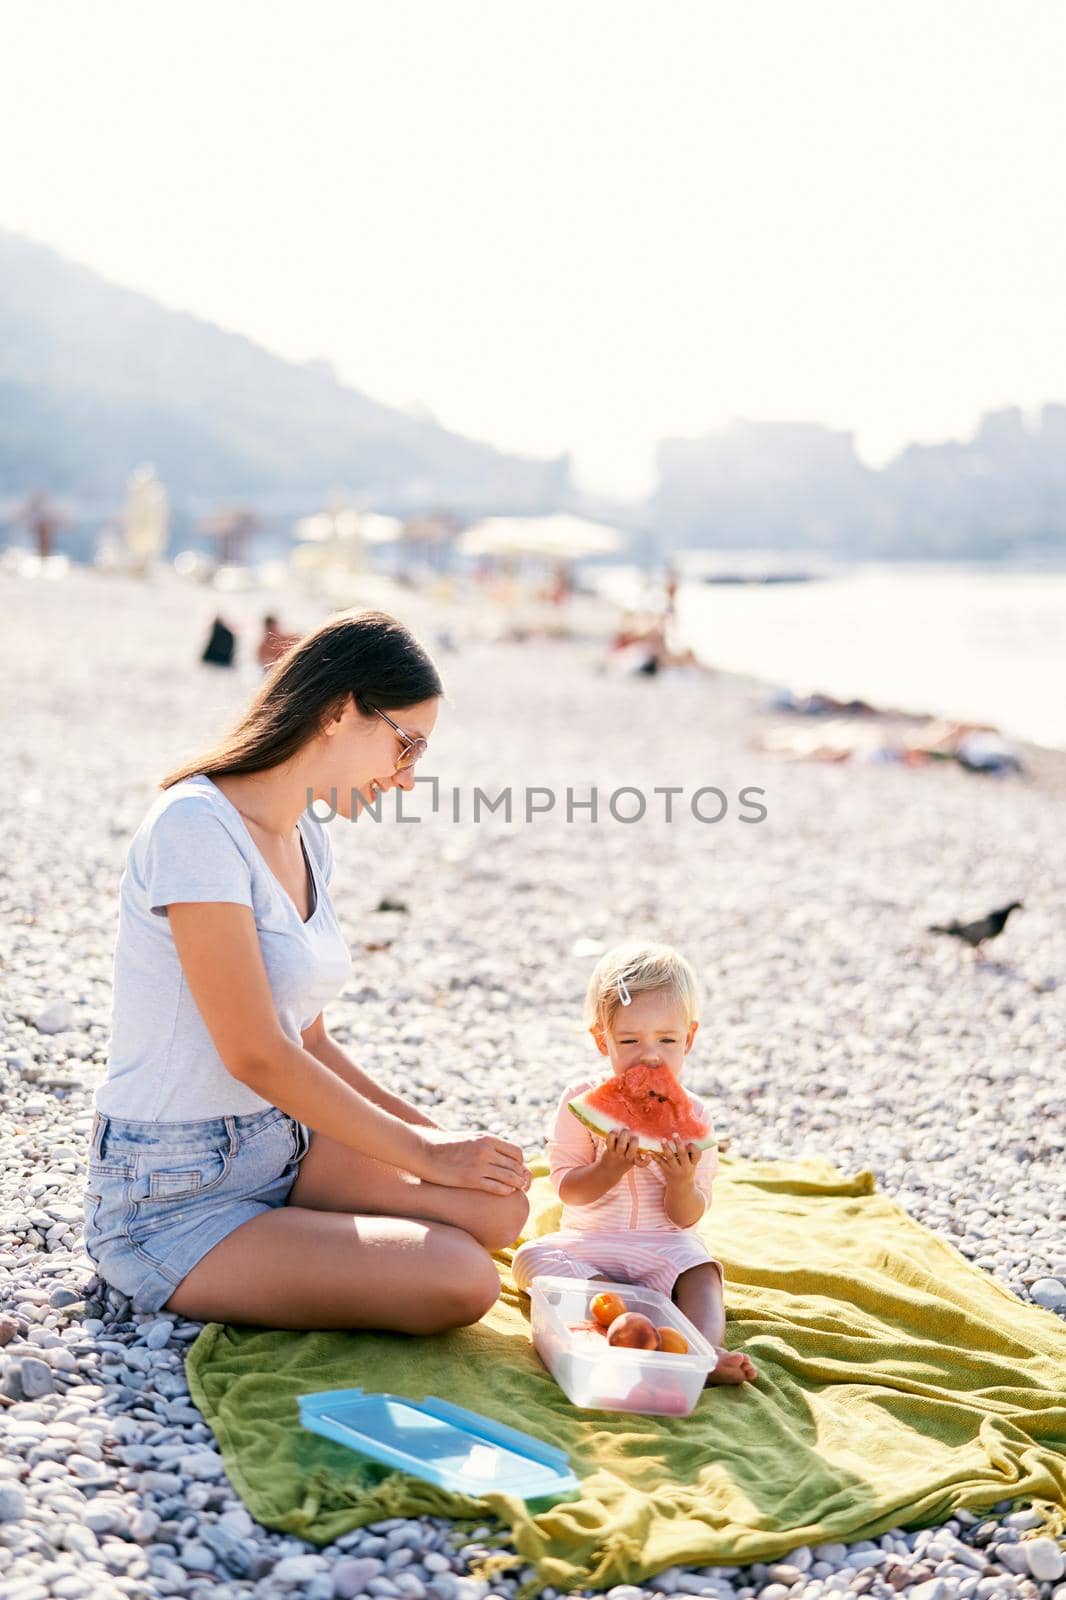 Smiling mom looking at baby girl eating watermelon on the beach. High quality photo